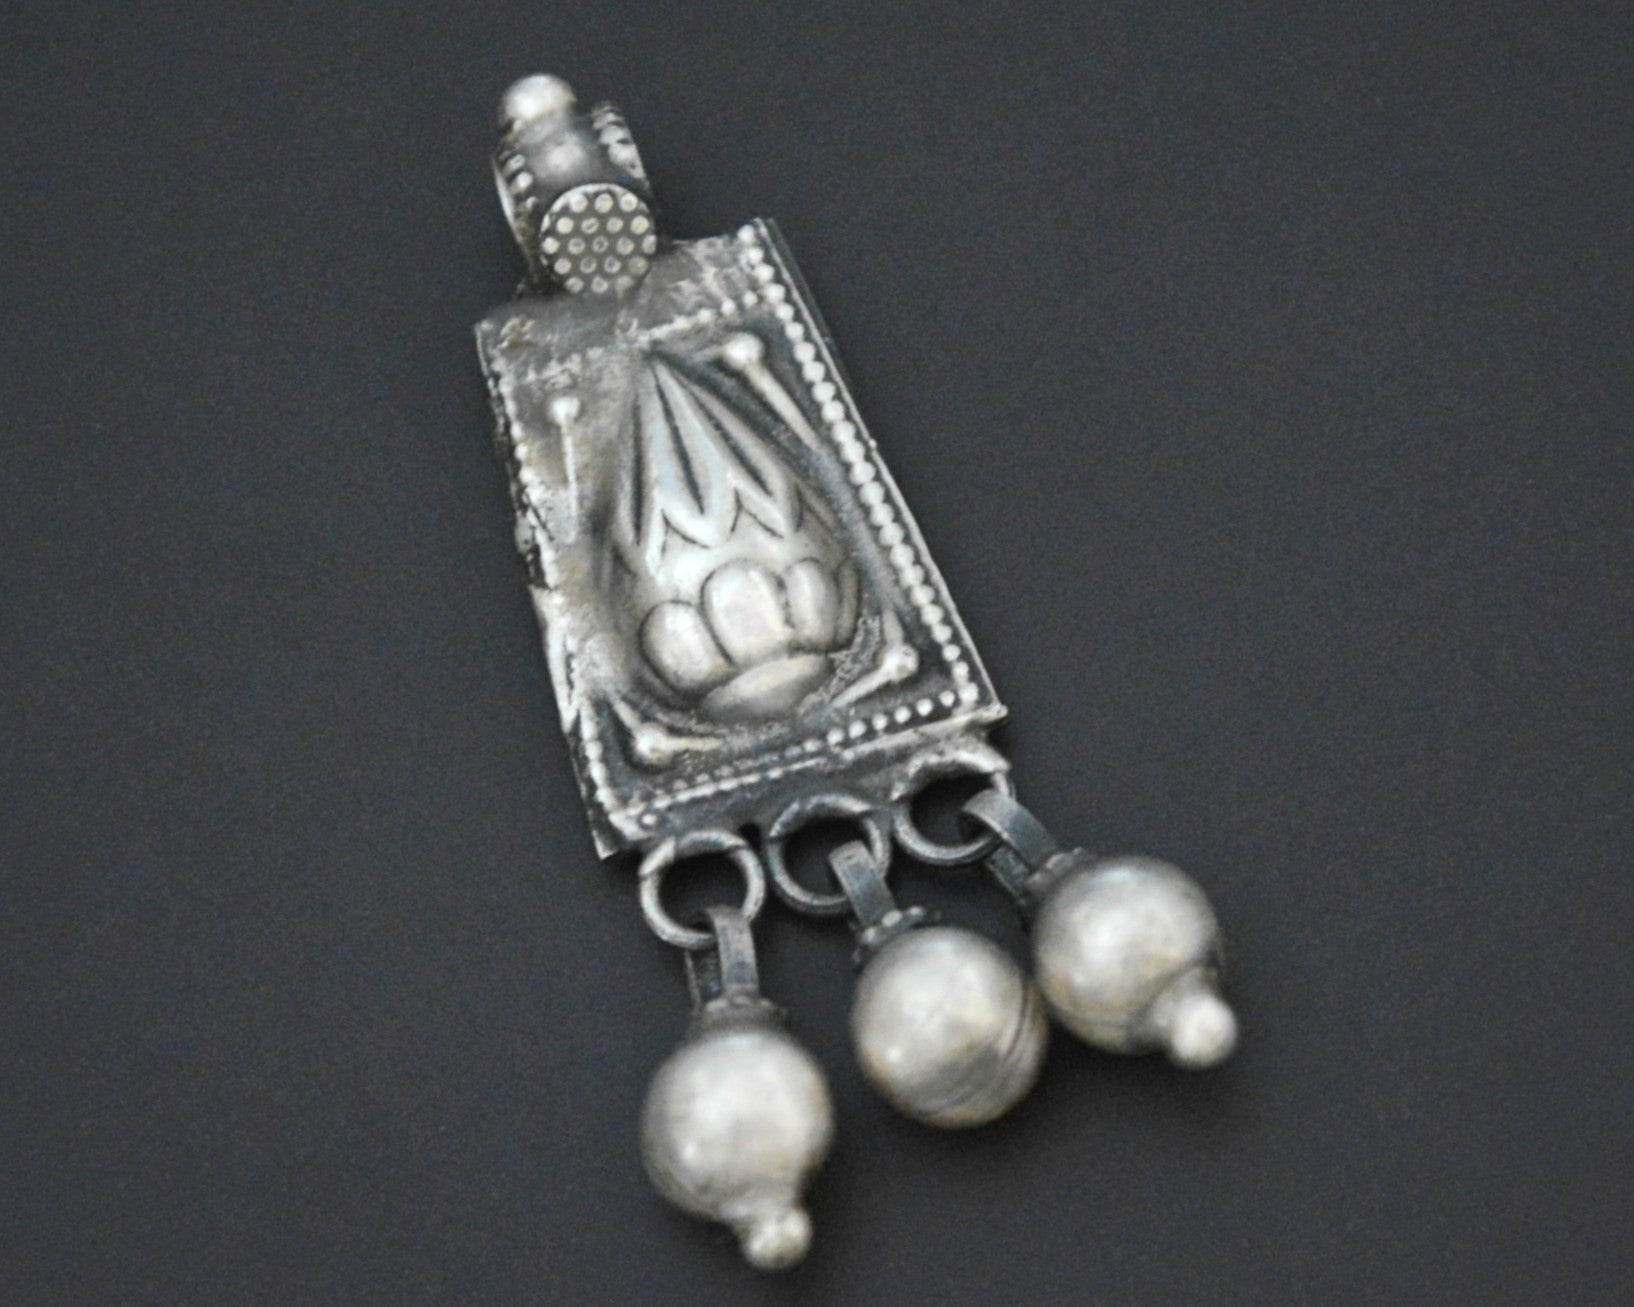 Rajasthani Silver Charm Pendant with Bells